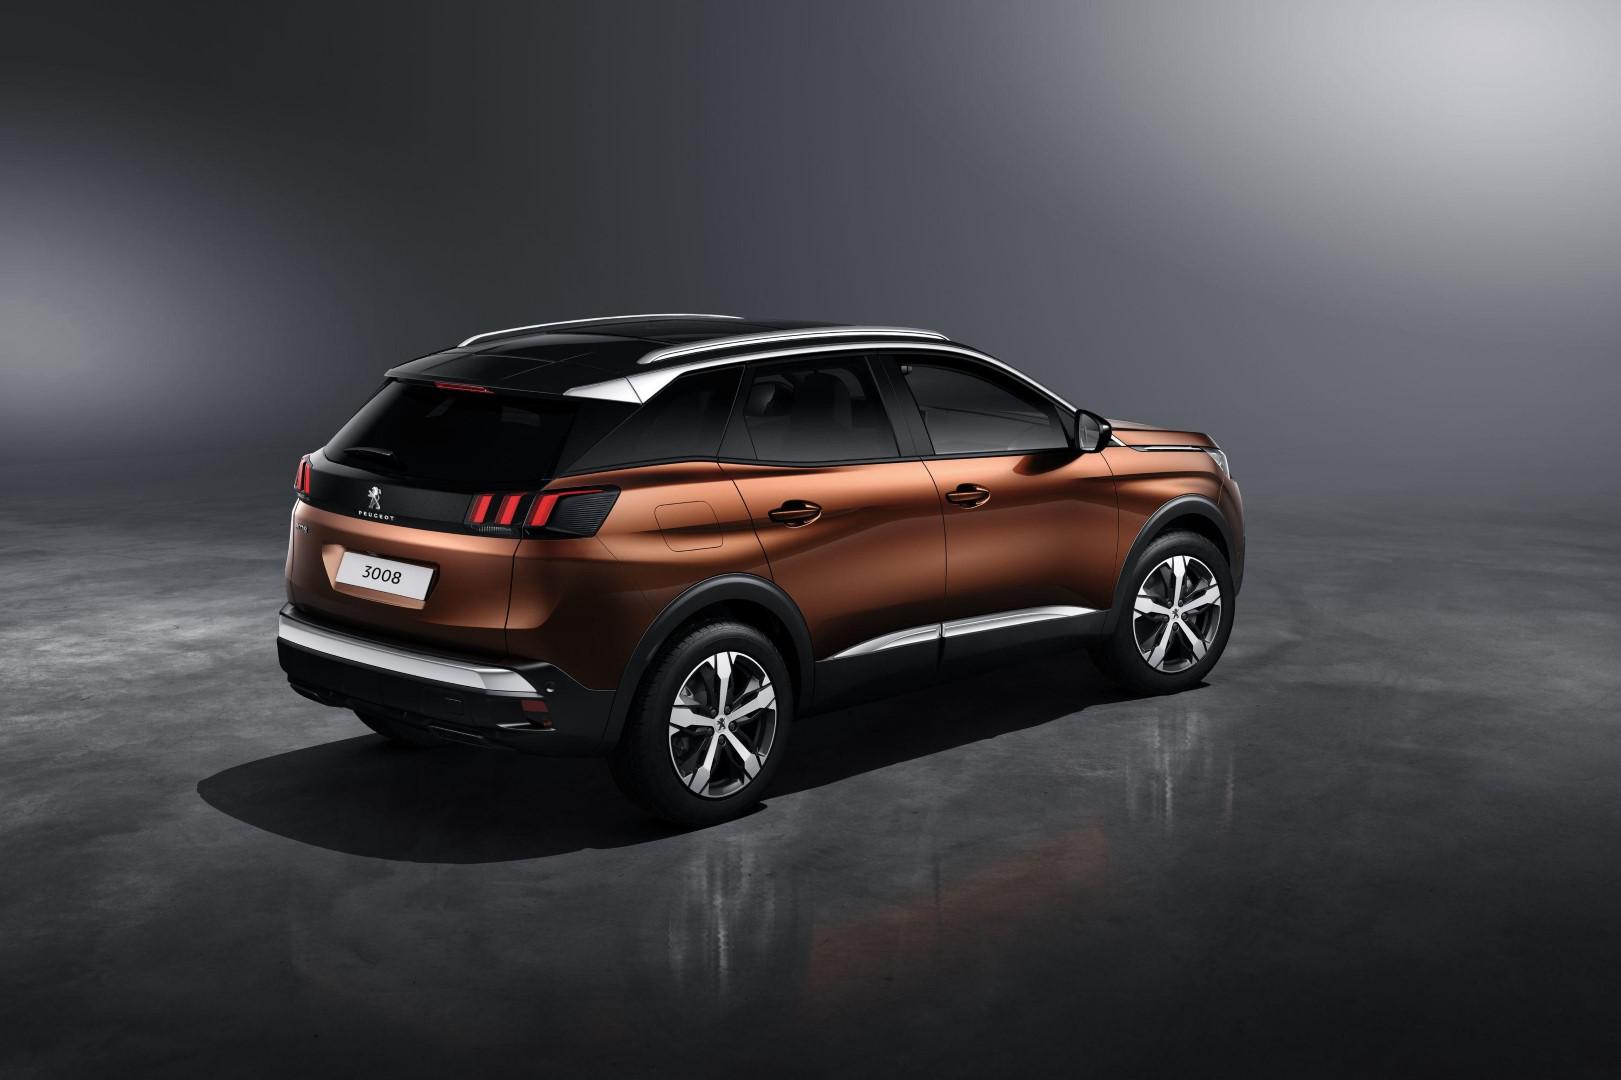 le-suv-peugeot-3008-car-of-the-year-2017-267-2.jpeg